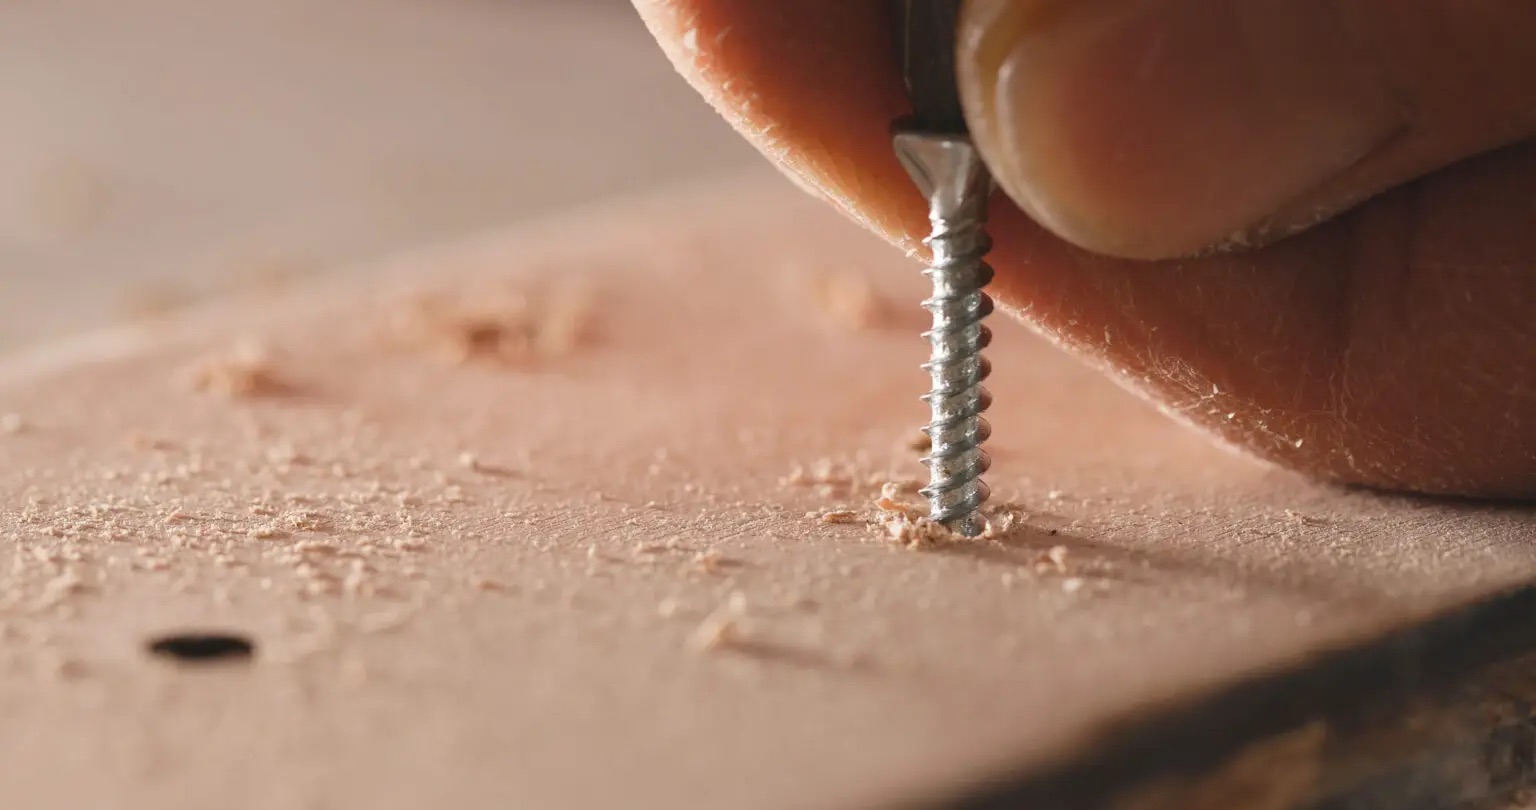 How To Remove Stripped Screws To Salvage Your Home Improvement Project